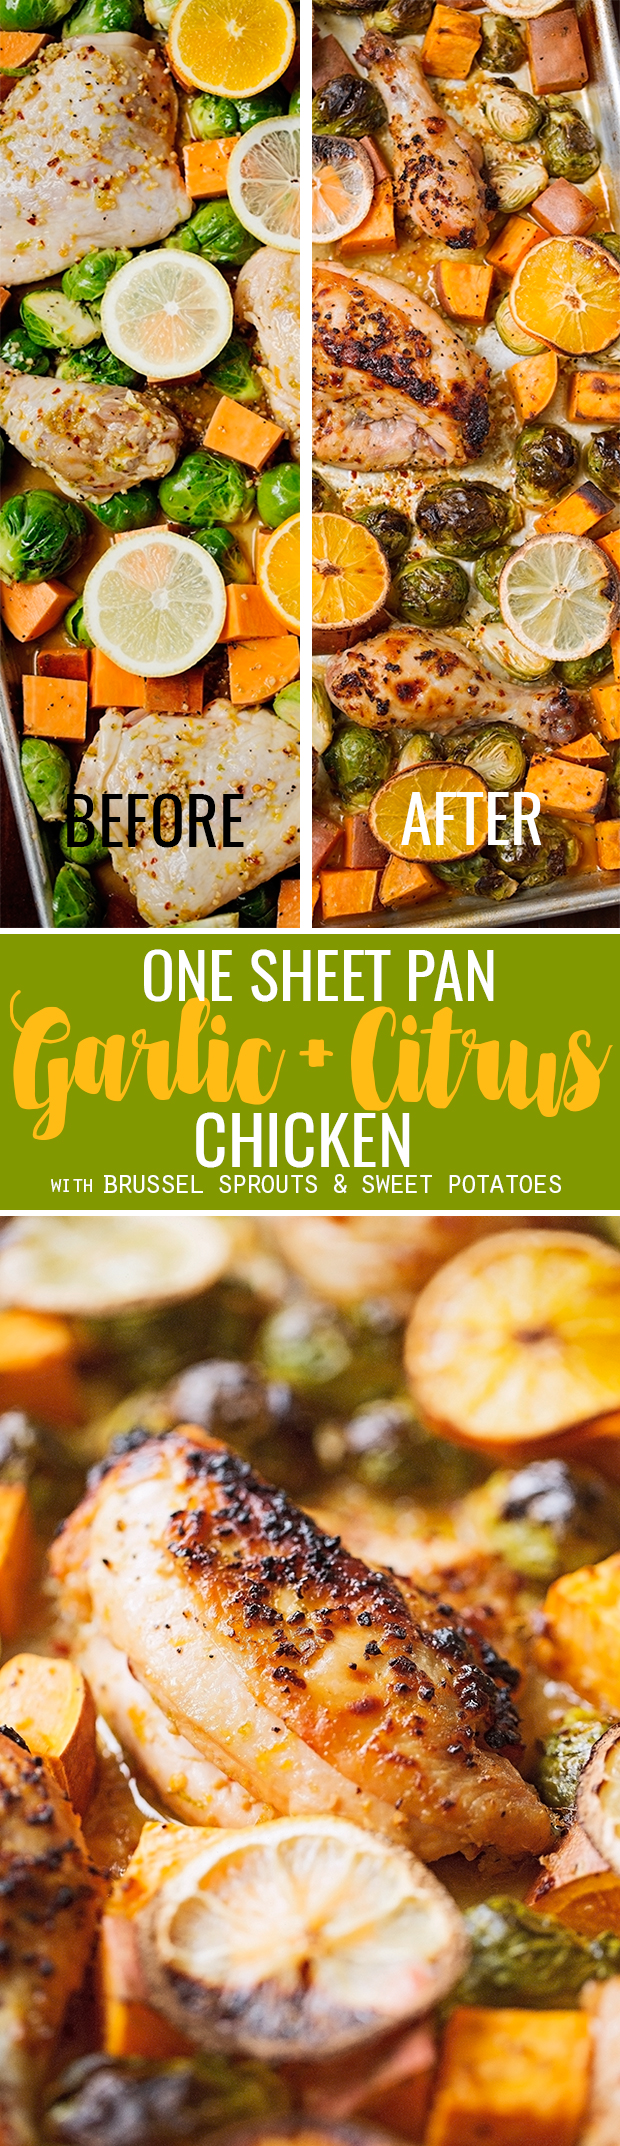 One-Sheet-Pan-Garlic-Citrus-Chicken-with-Brussel-Sprouts-and-Sweet-Potatoes-7